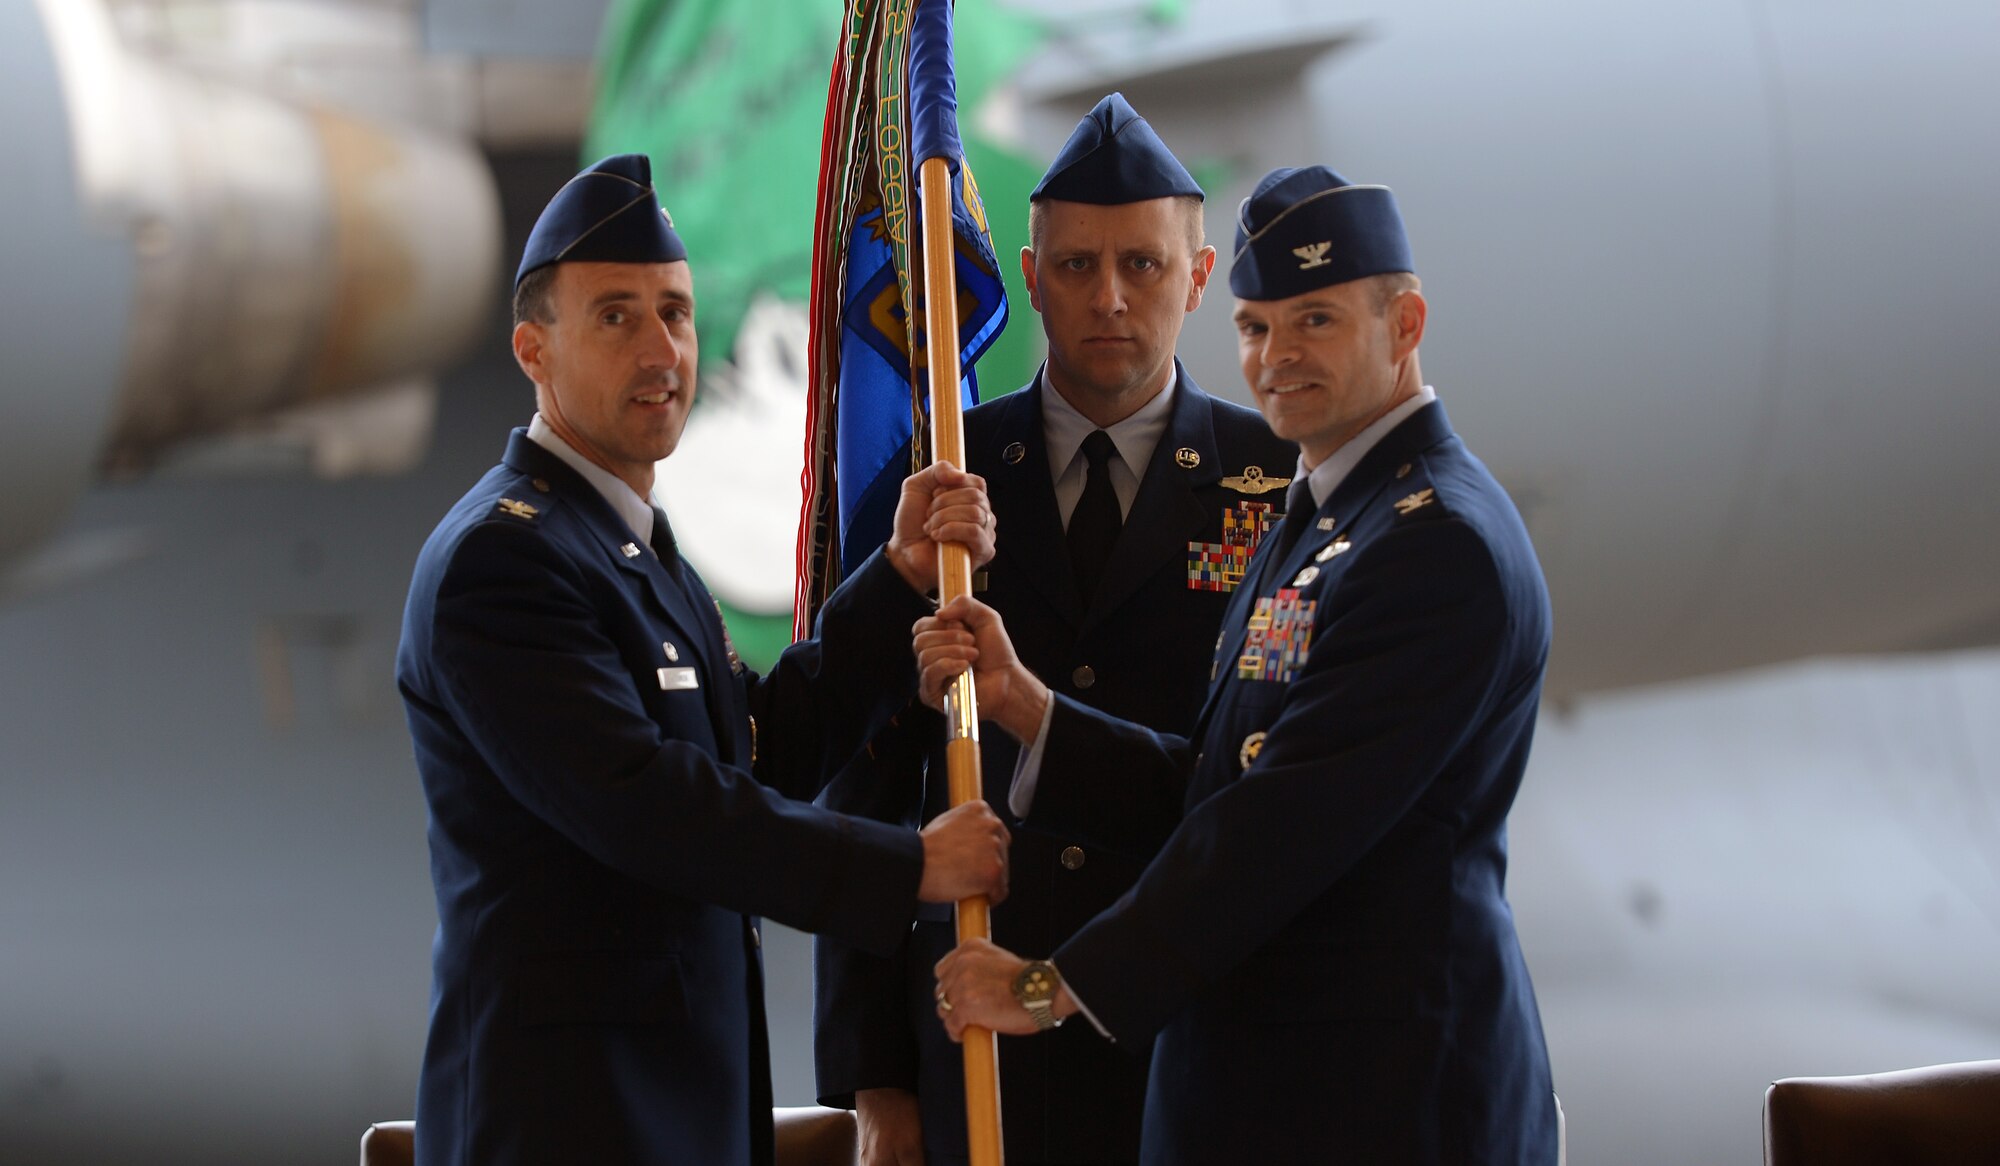 Col. Leonard Kosinski (left), passes a guidon to Col. Mark Fuhrmann, 62nd Operations Group commander, as Chief Master Sgt. Scott Mills (center), 62nd OG chief, stands at attention May 1, 2017, during a change of command ceremony at Joint Base Lewis-McChord, Wash.  Fuhrman took command from the outgoing commander Lt. Col. Brian Smith. (U.S. Air Force photo/Senior Airman Jacob Jimenez) 